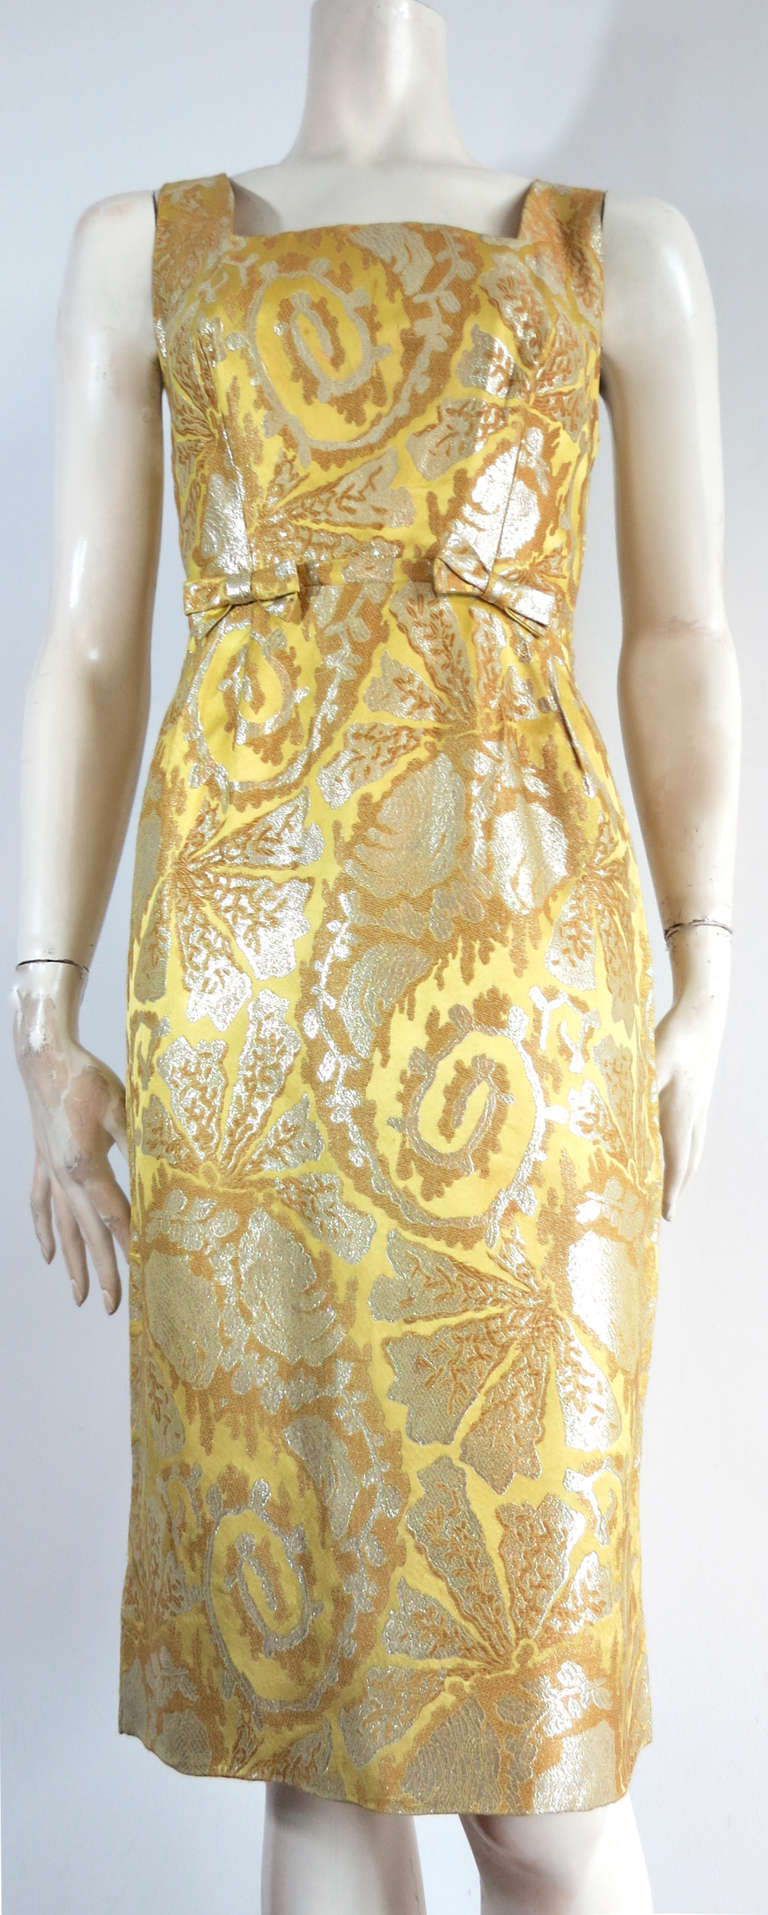 1960's Metallic brocade cocktail dress.

This luxurious cocktail dress is made of a gorgeous, woven silk brocade with a chartreuse satin ground, and metallic platinum tapestry artwork.

Twin bow-tie detail at front waist with square-neck, front